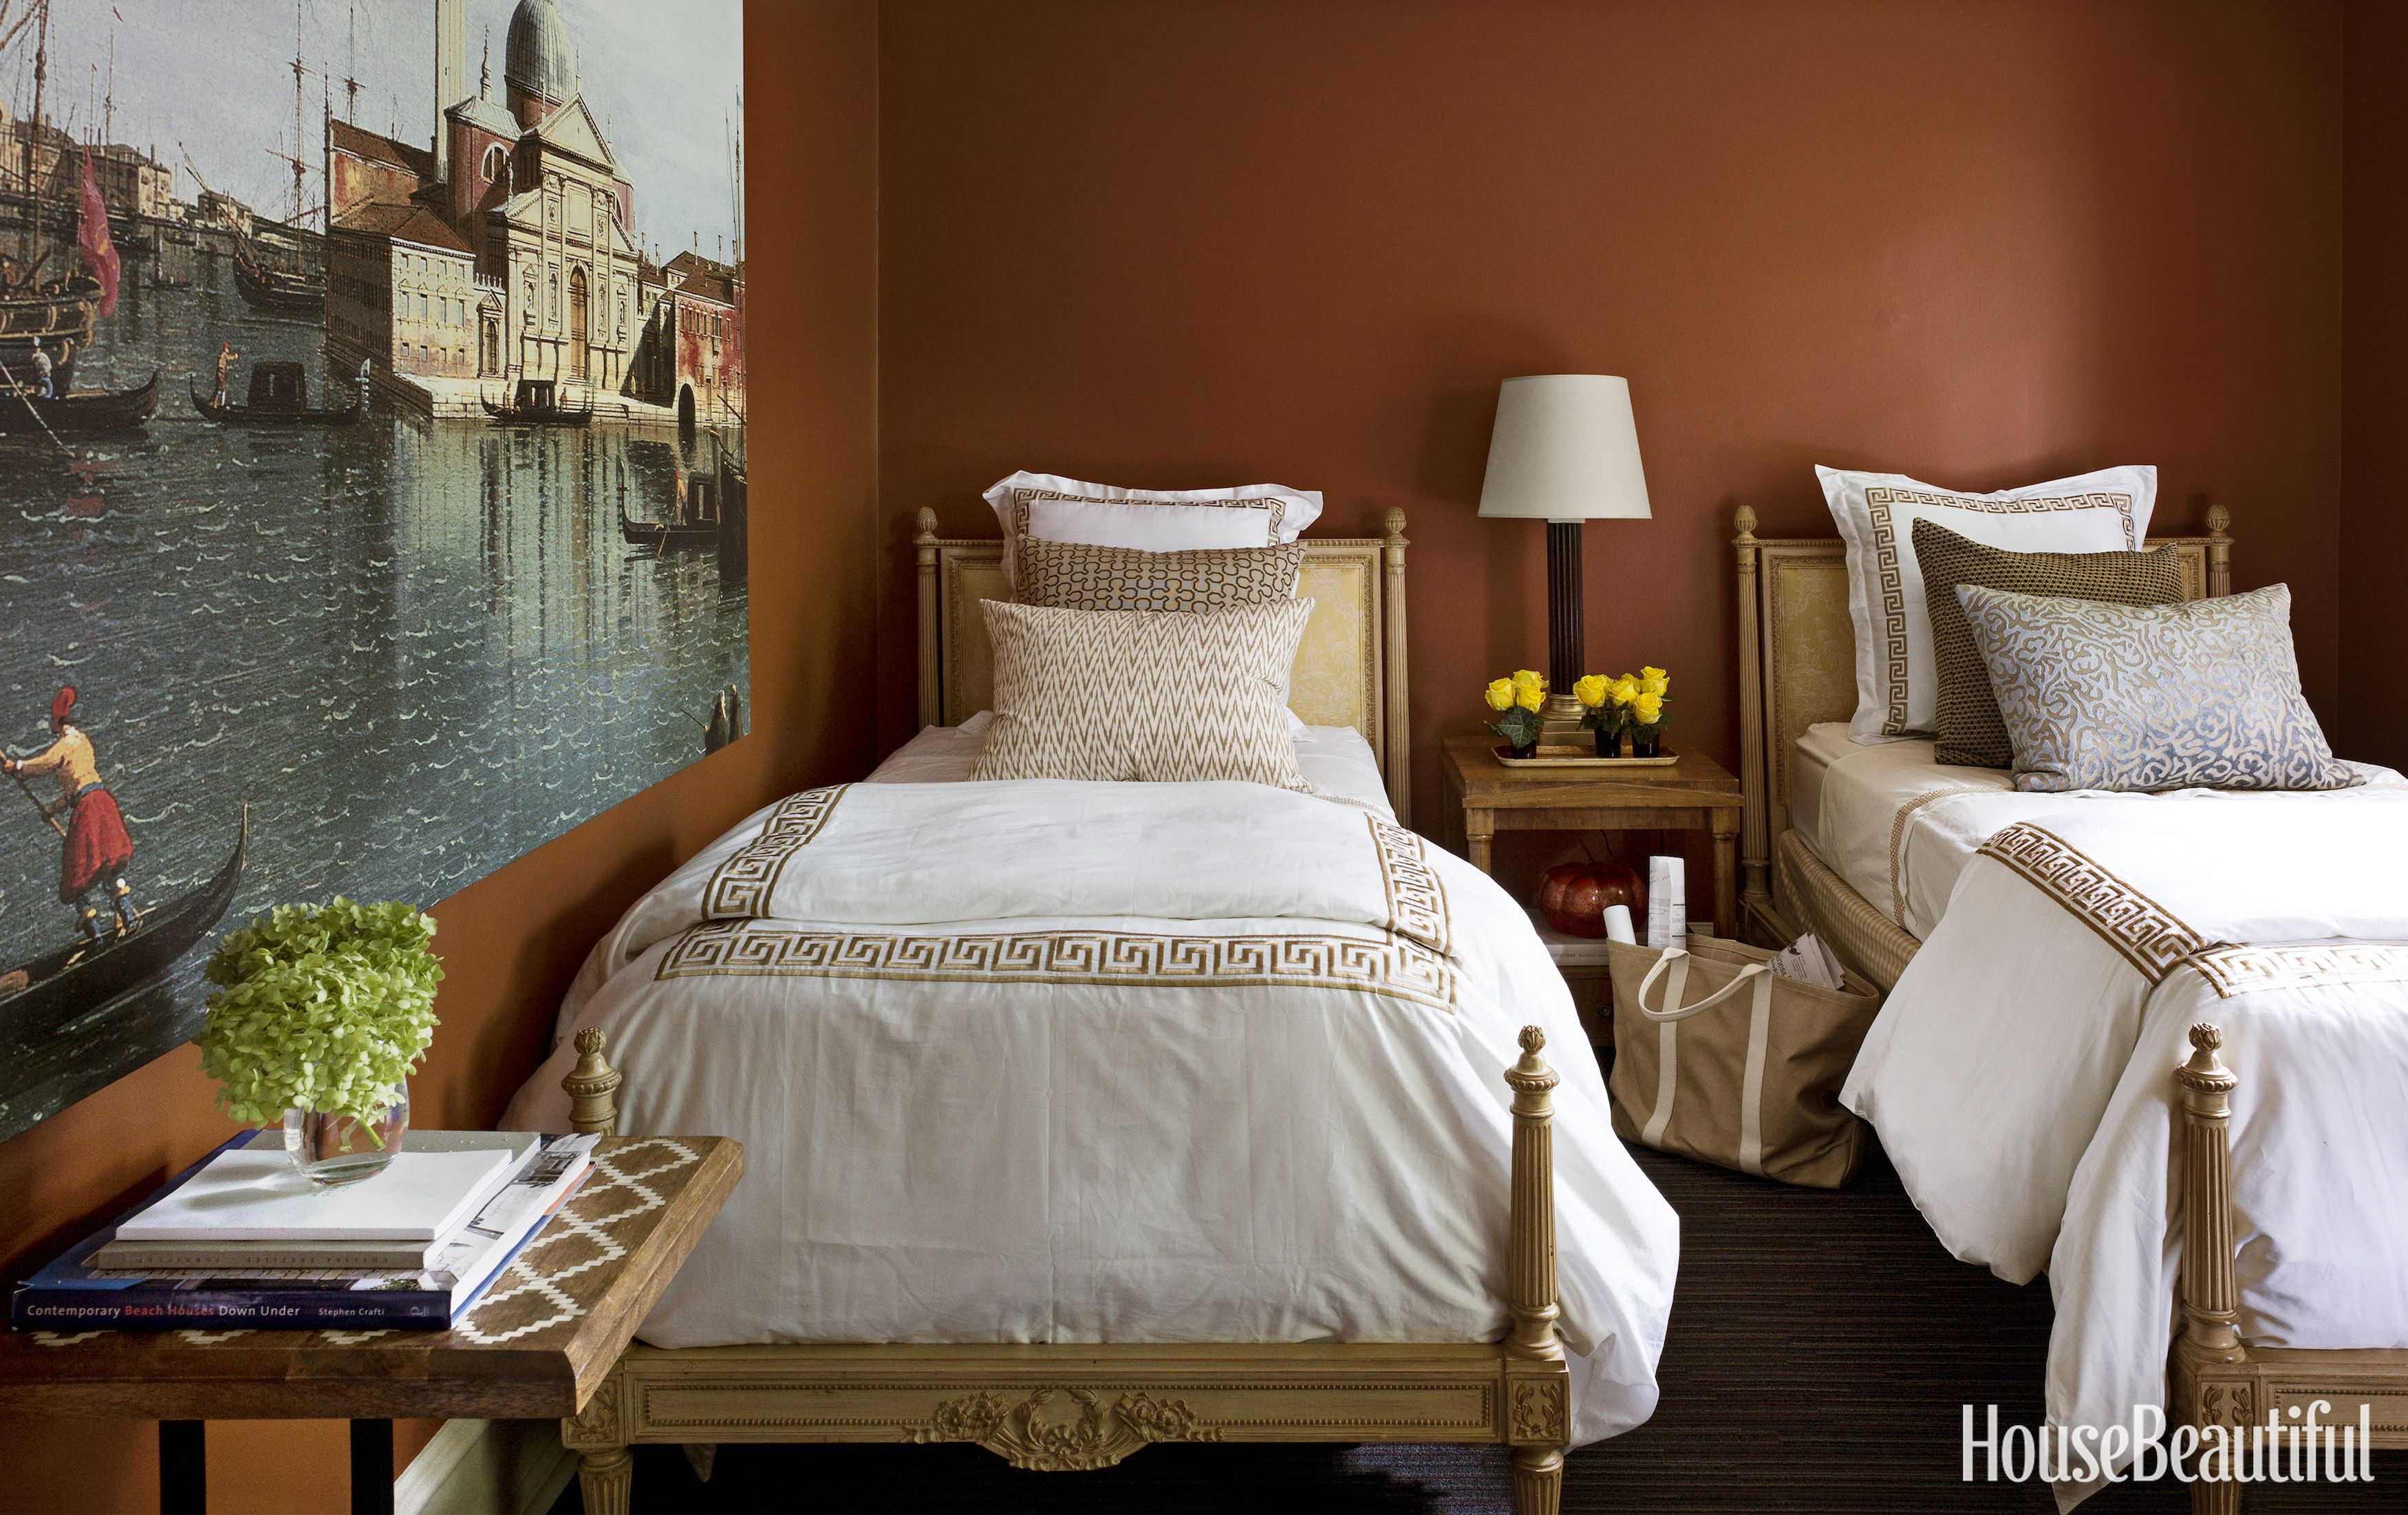 The 10 Best Brown Paint Colors Designers Love, Havenly Blog